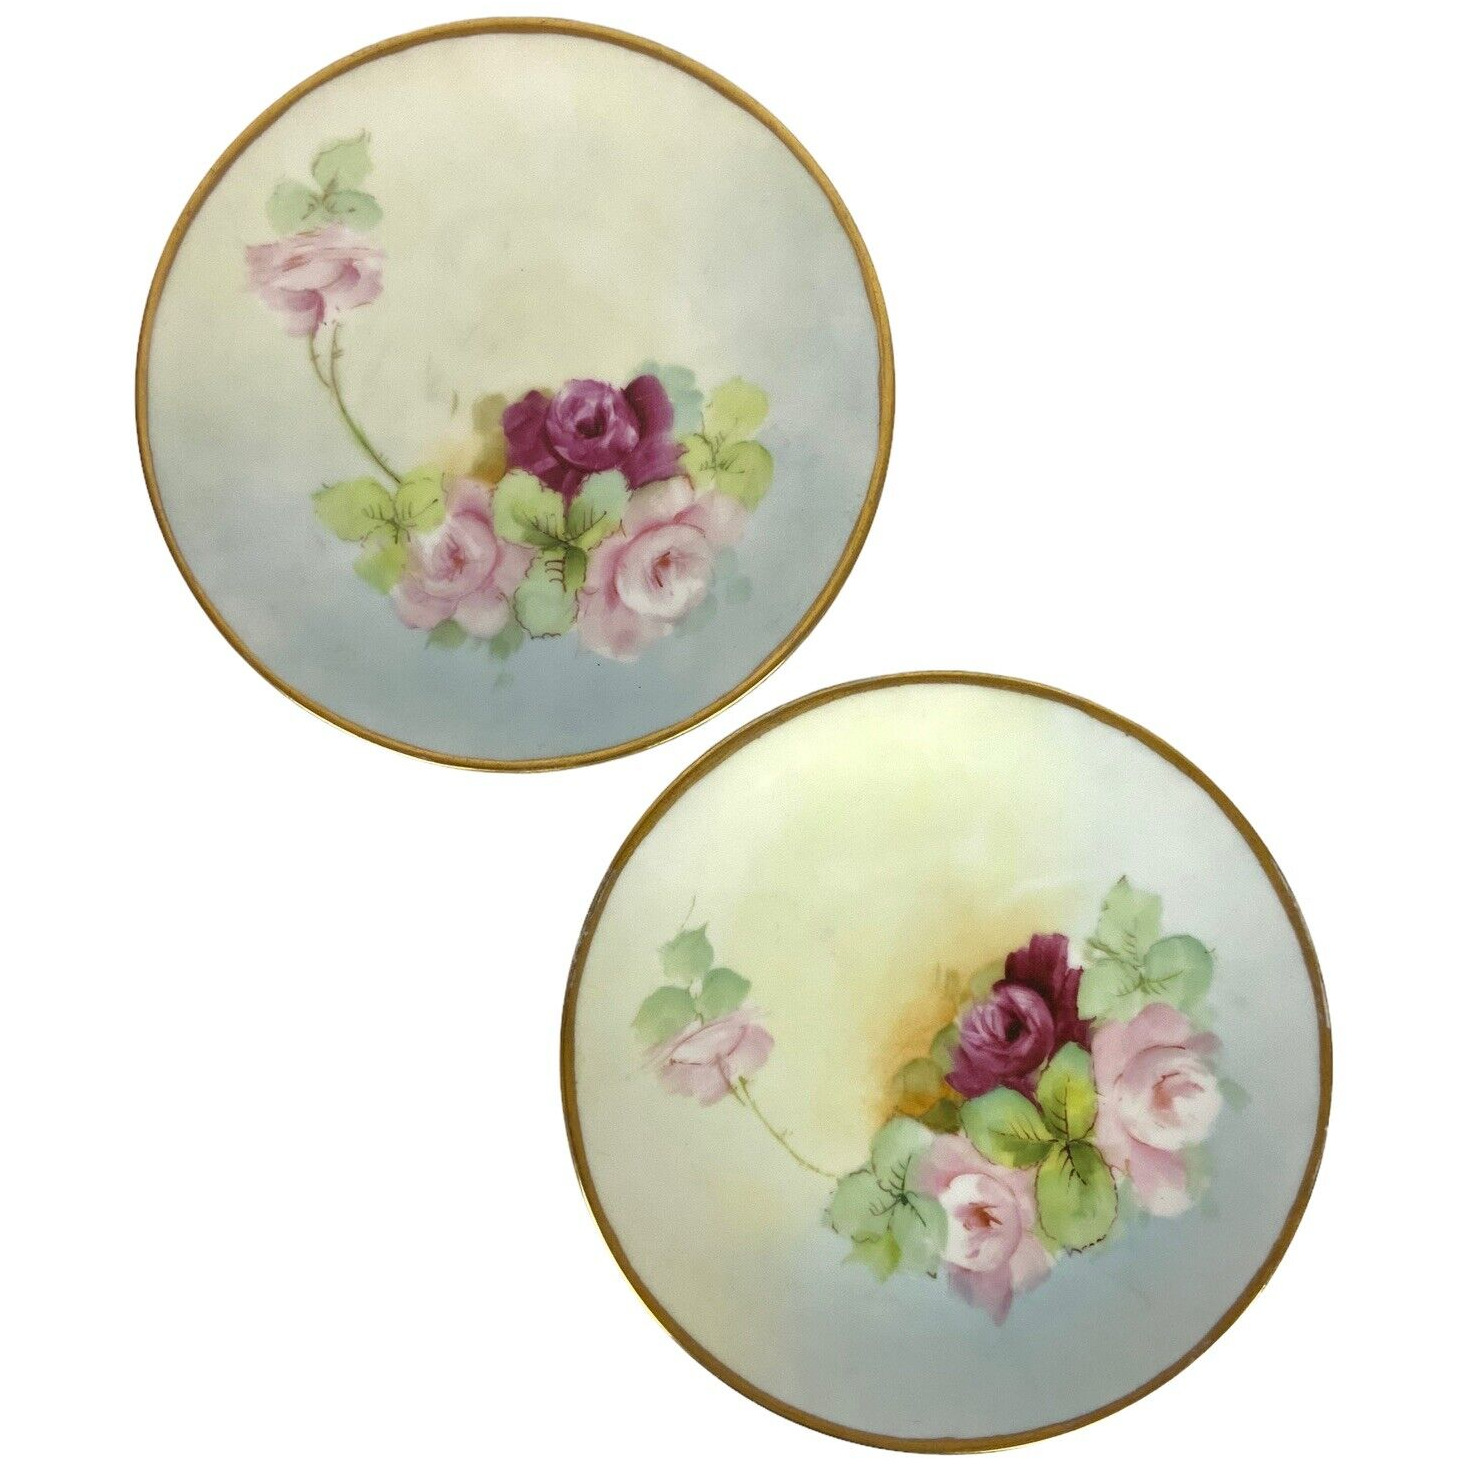 Favorite Bavaria 2 China Plates Hand Painted Roses Floral Gold Trimmed Germany